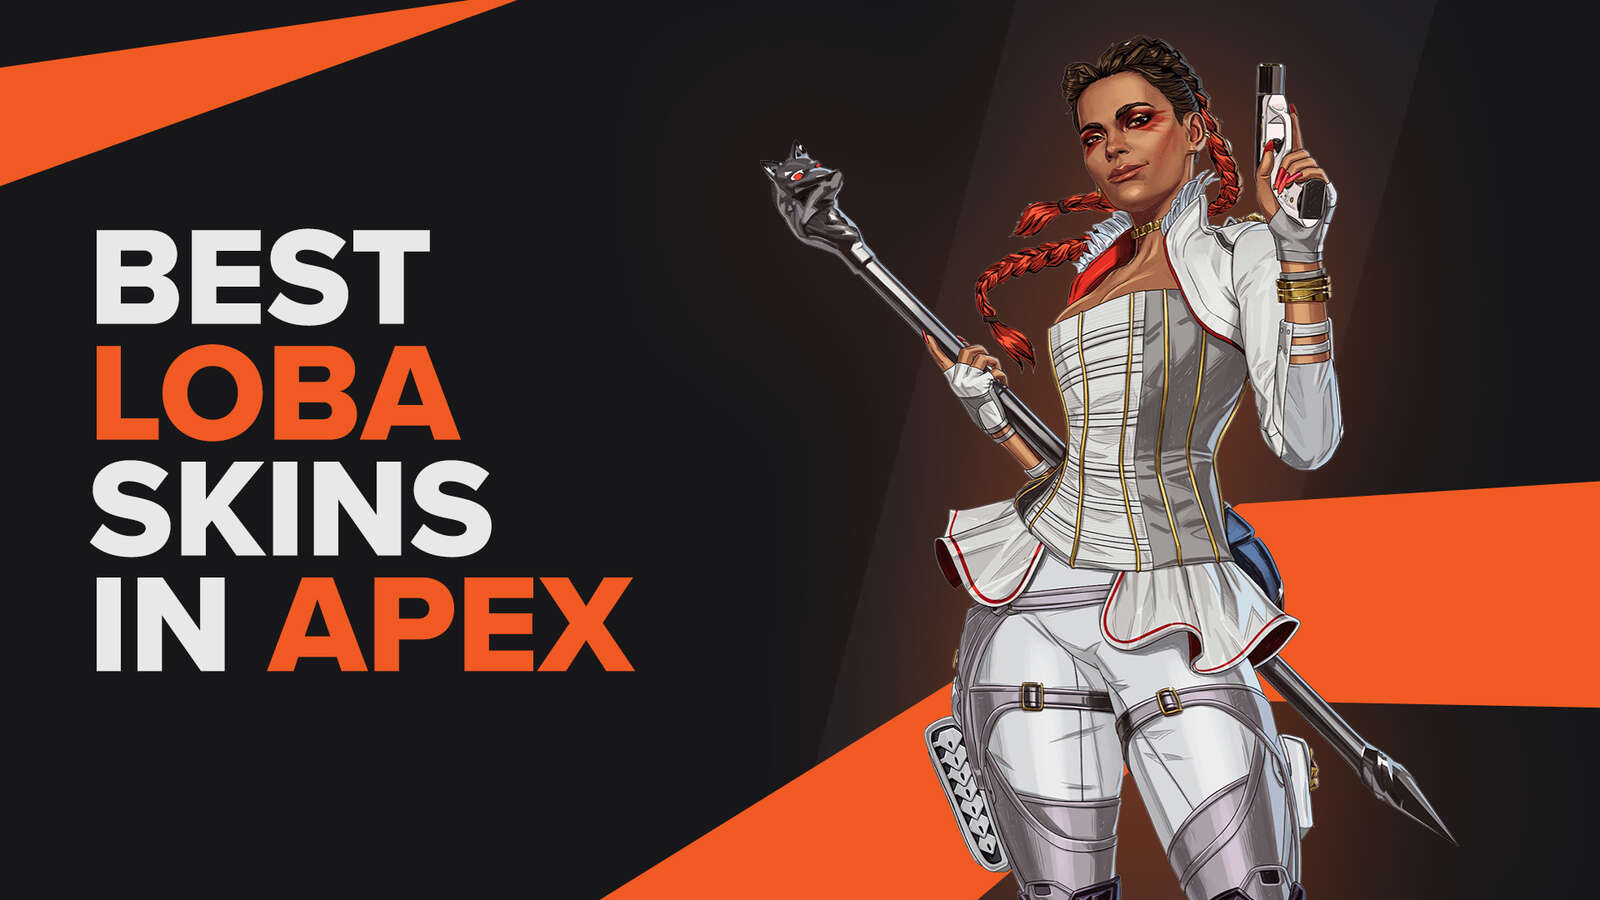 The Best Loba Skins in Apex Legends That Make You Standout